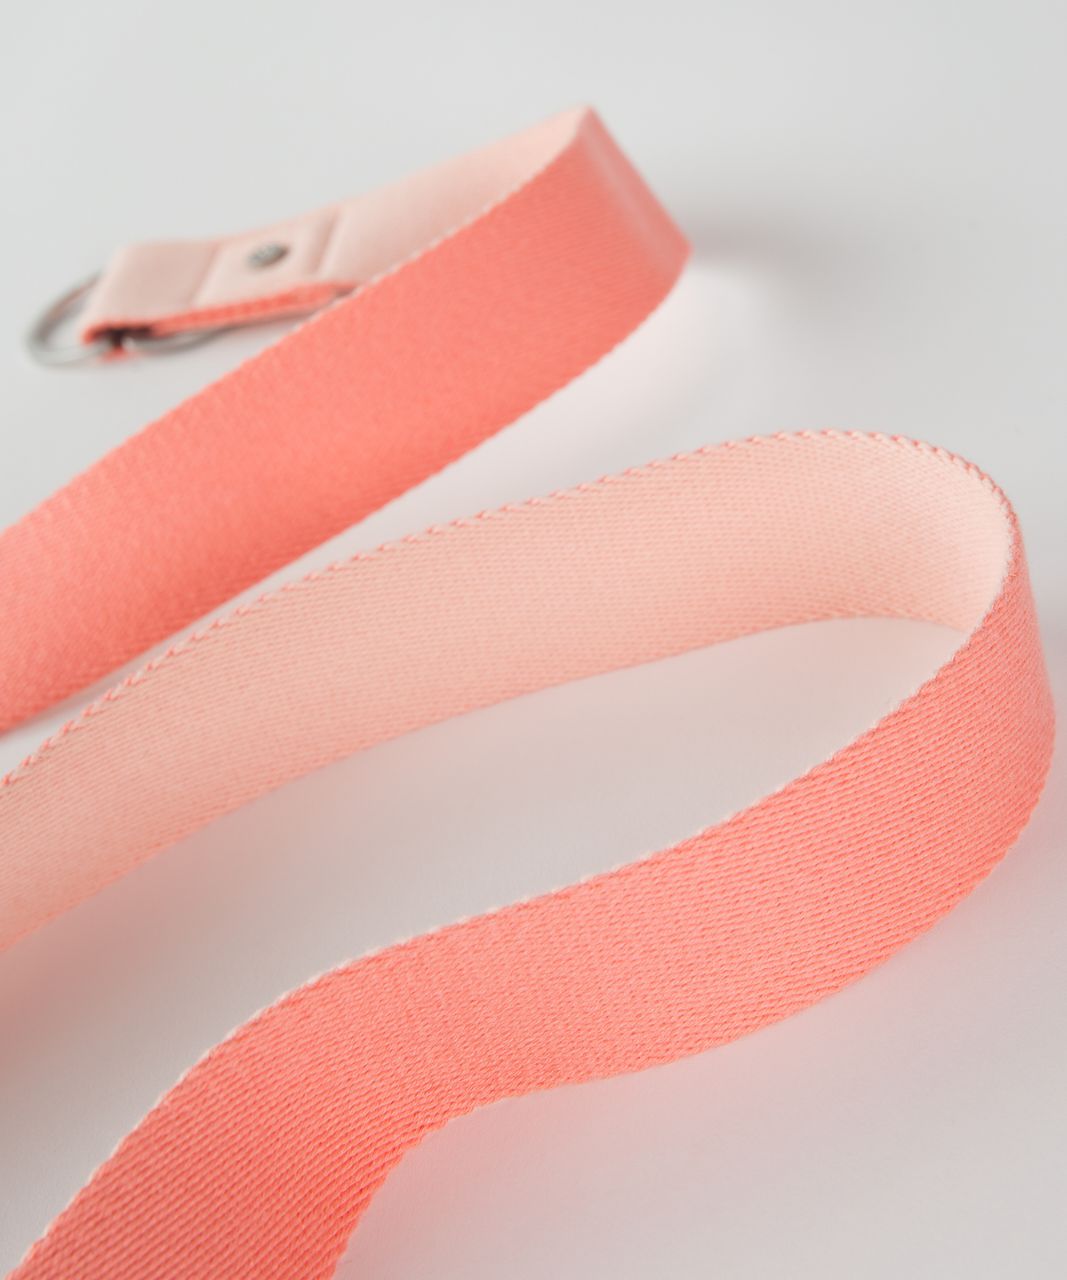 Lululemon No Limits Stretching Strap - Pink Sorbet / Sunny Coral